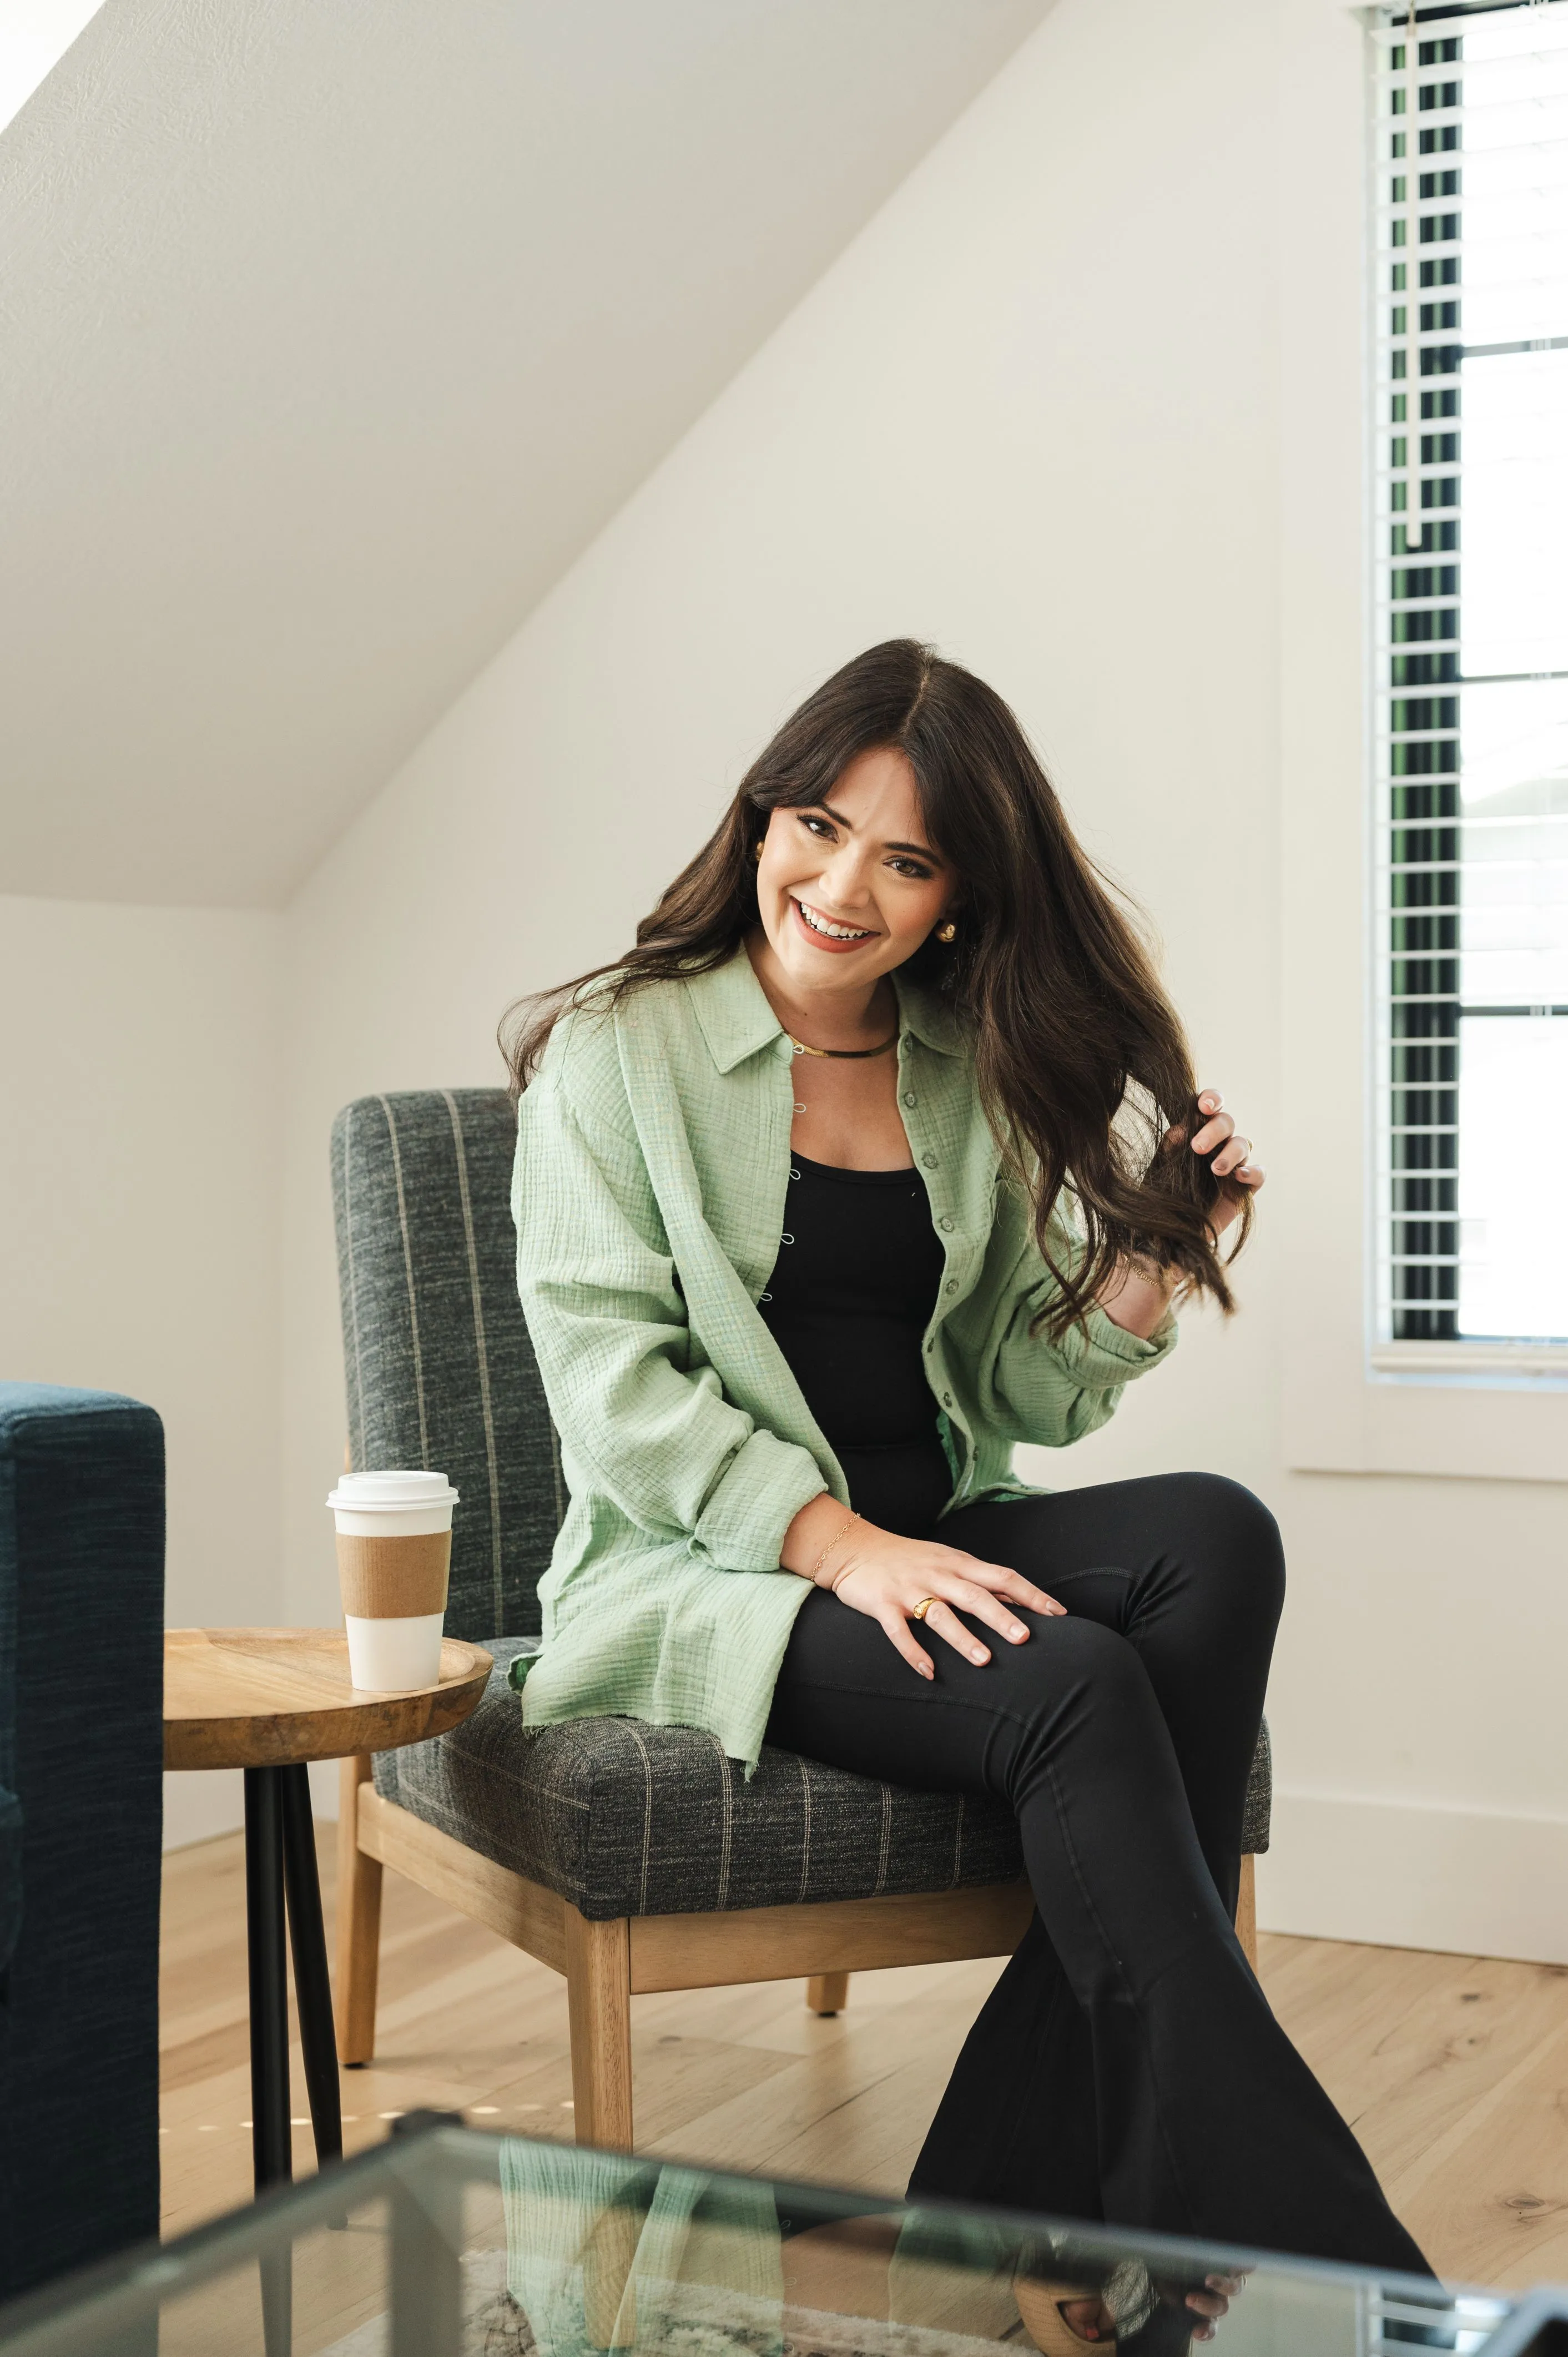 Smiling woman sitting casually on a chair in a well-lit room with a coffee cup on a side table.